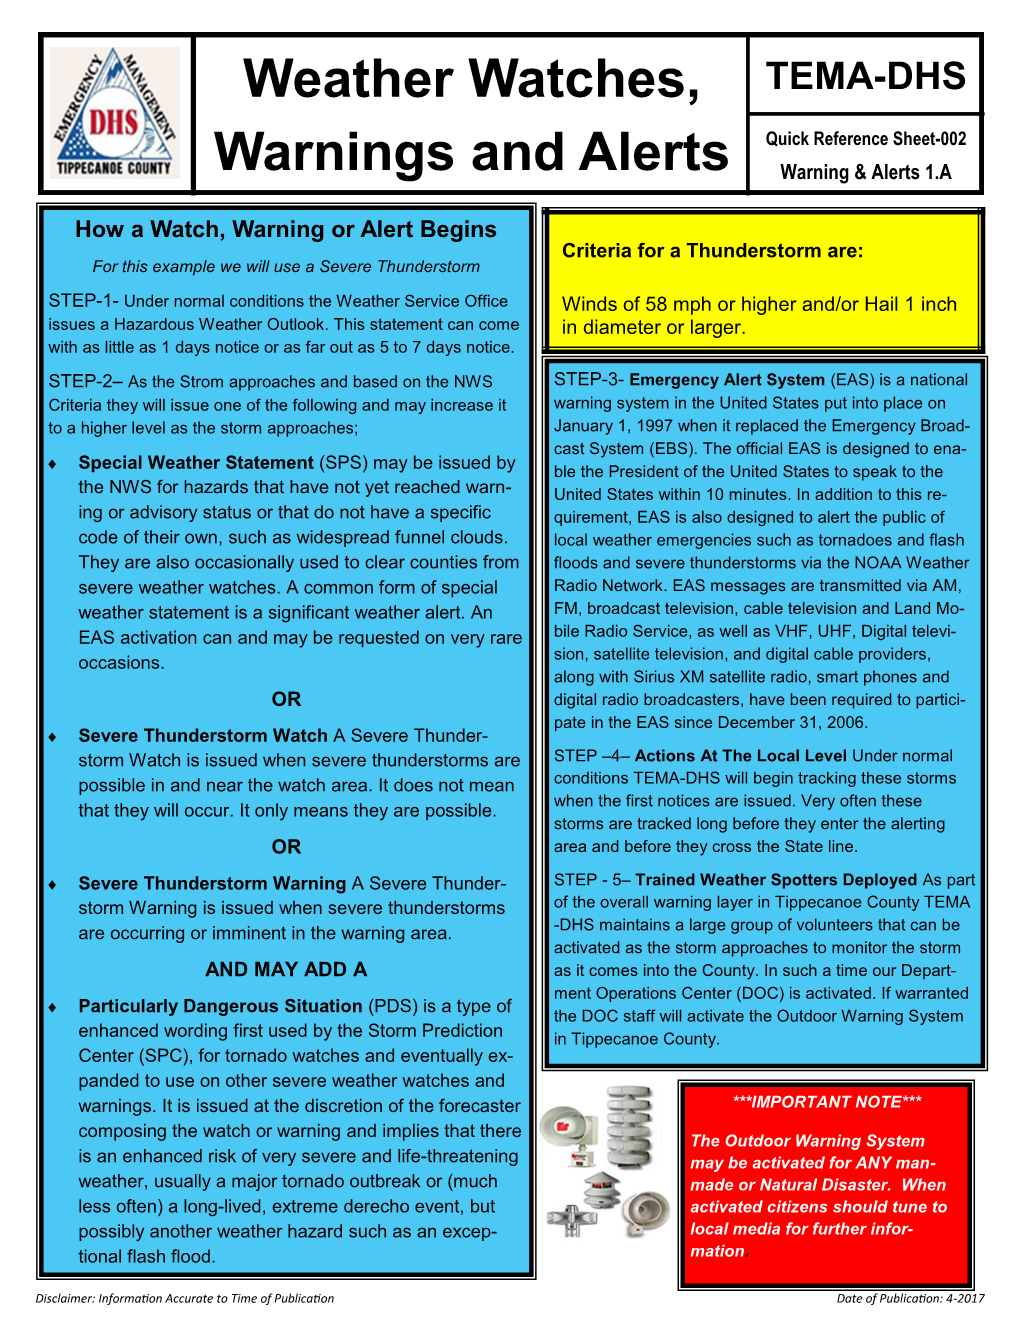 Weather Watches, Warnings and Alerts Quick Reference Sheet-002